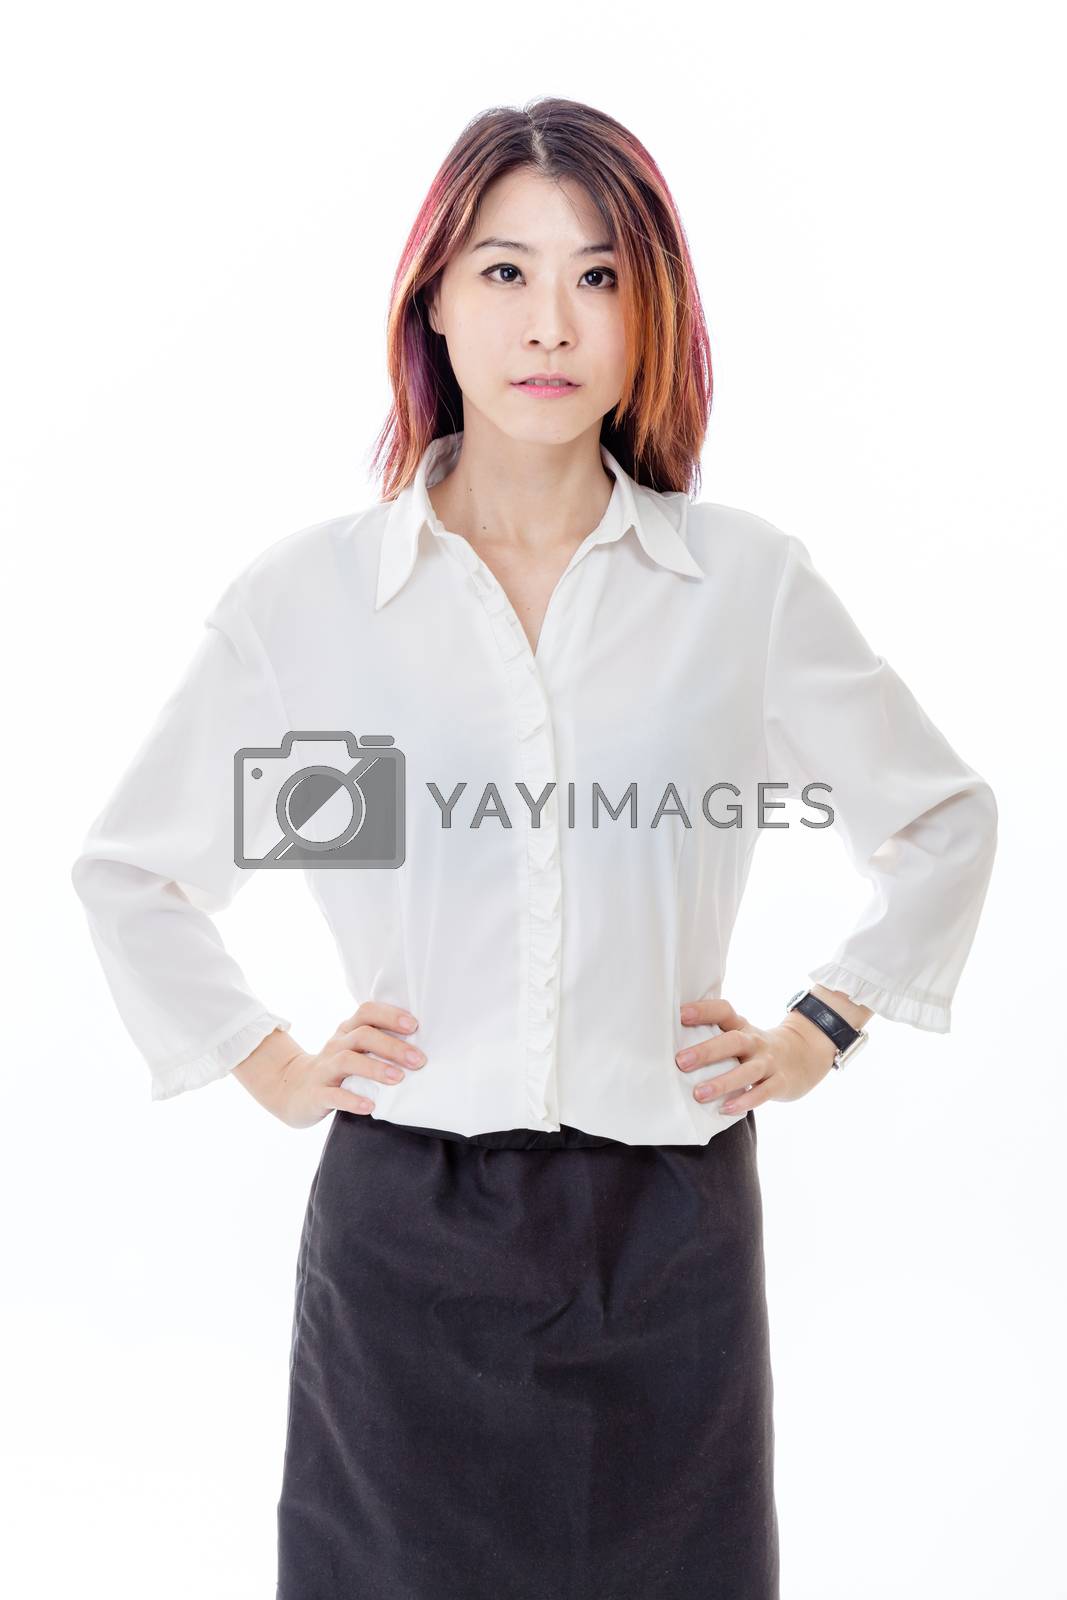 Royalty free image of Businesswoman by imagesbykenny